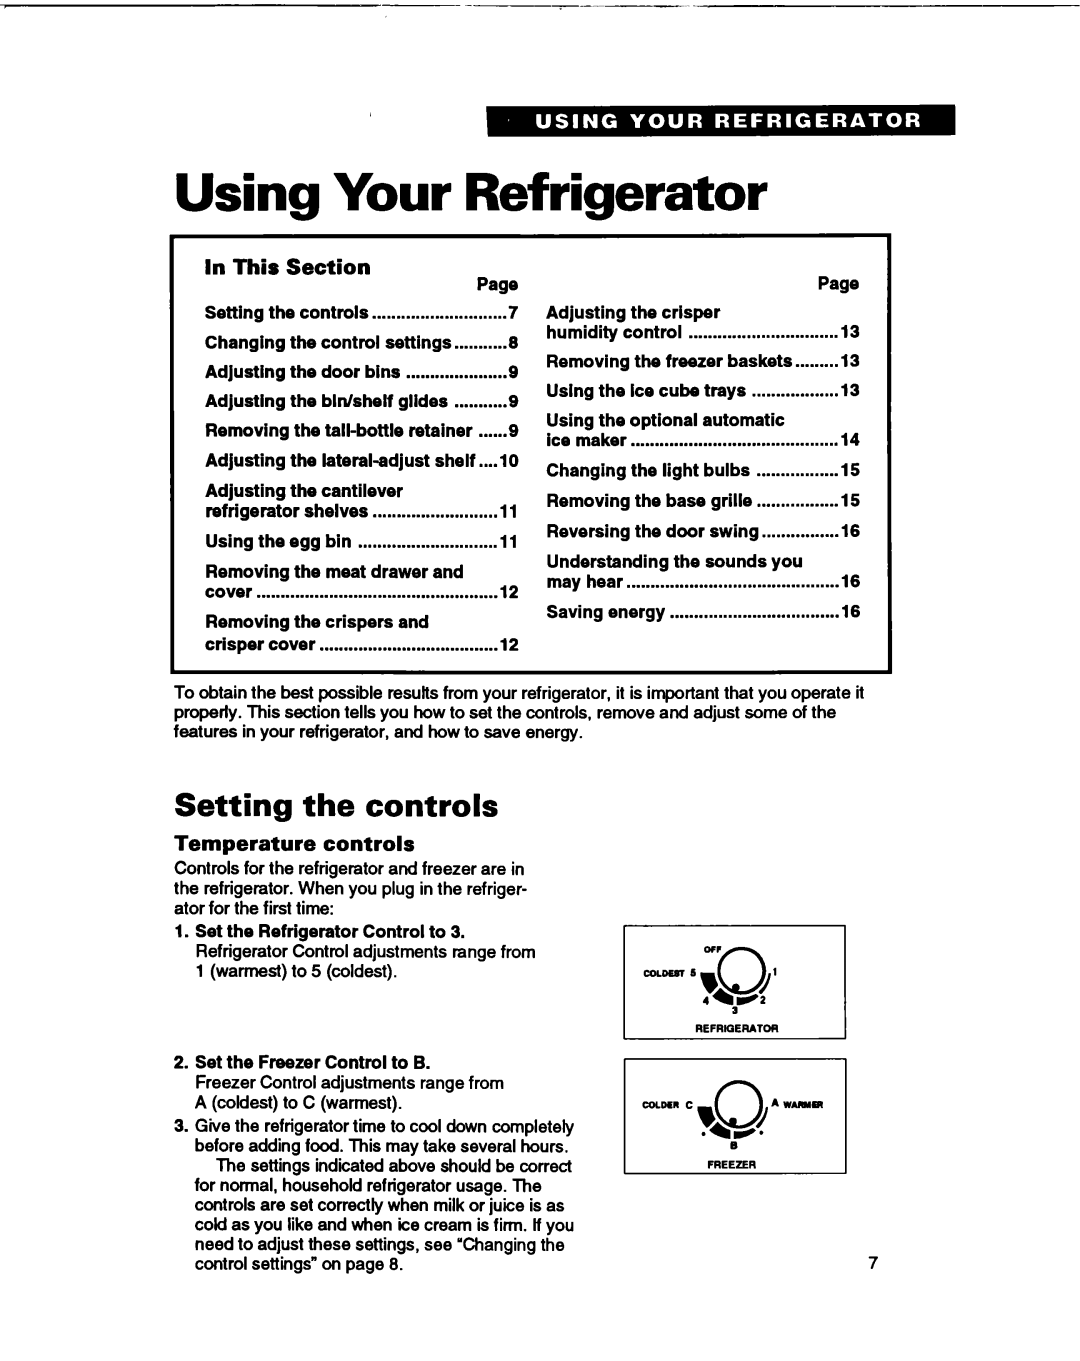 Whirlpool B2lDK Using Your Refrigerator, Setting the controls, Temperature controls, In This, Section 